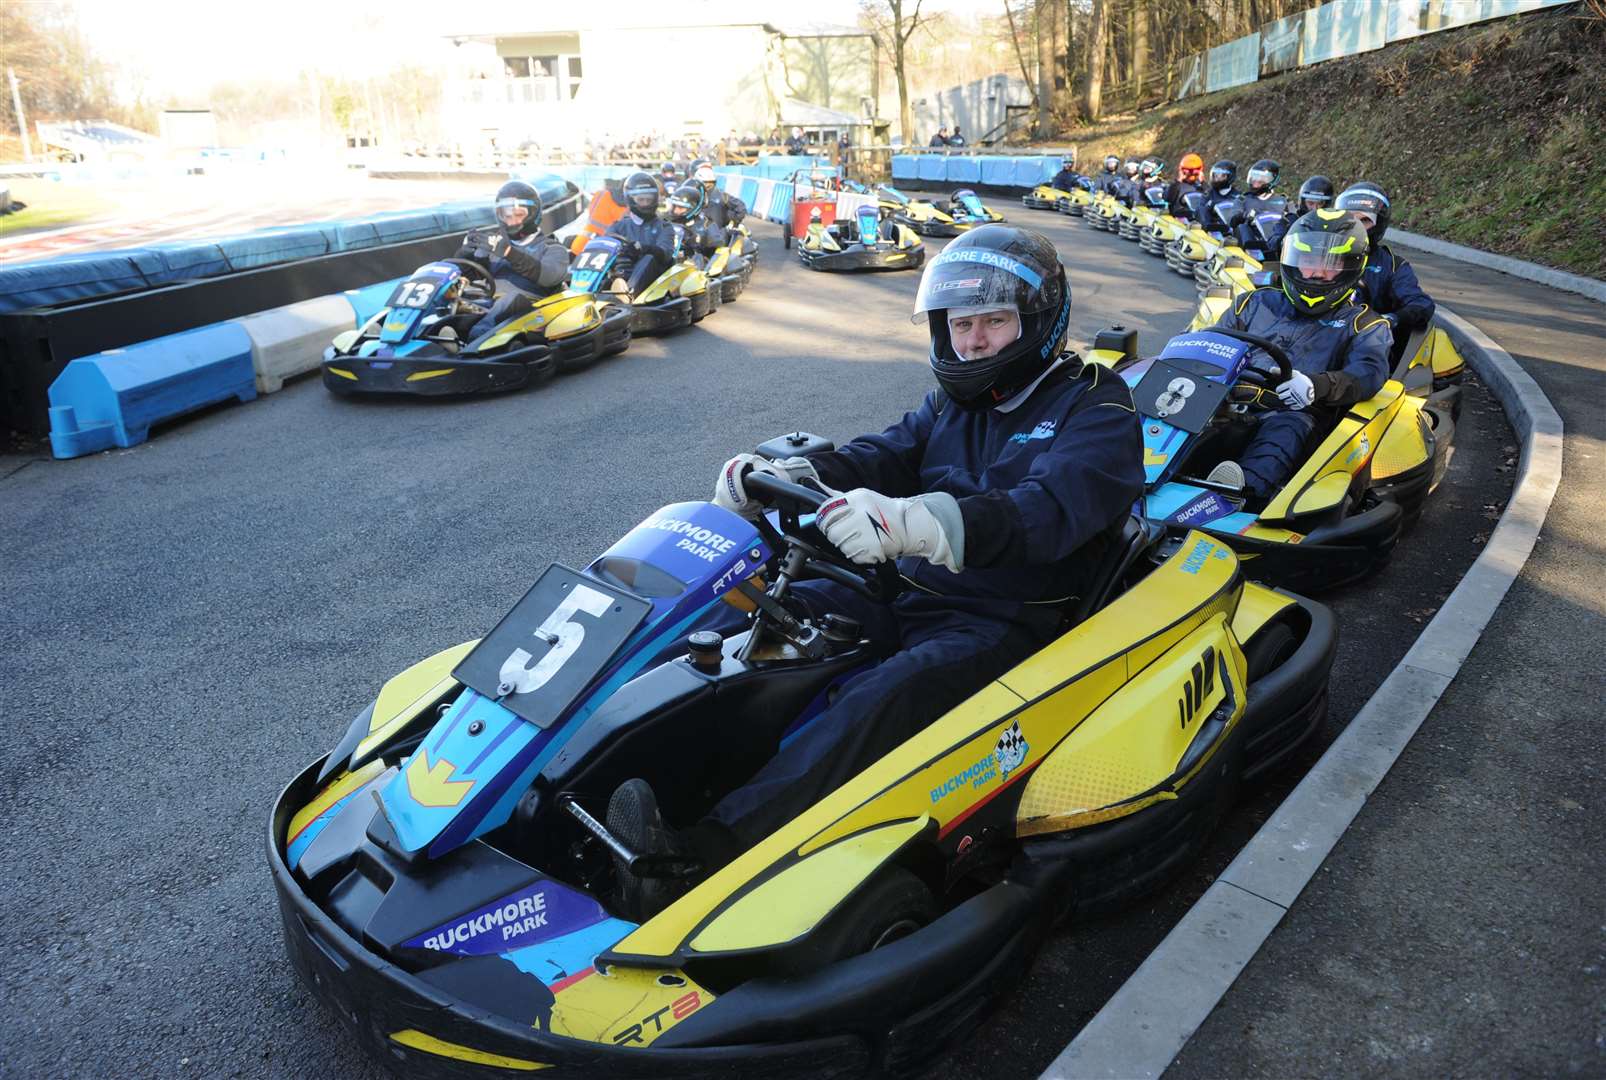 Hire karting is popular at Buckmore, but the pandemic has hit the circuit's finances. Picture: Steve Crispe